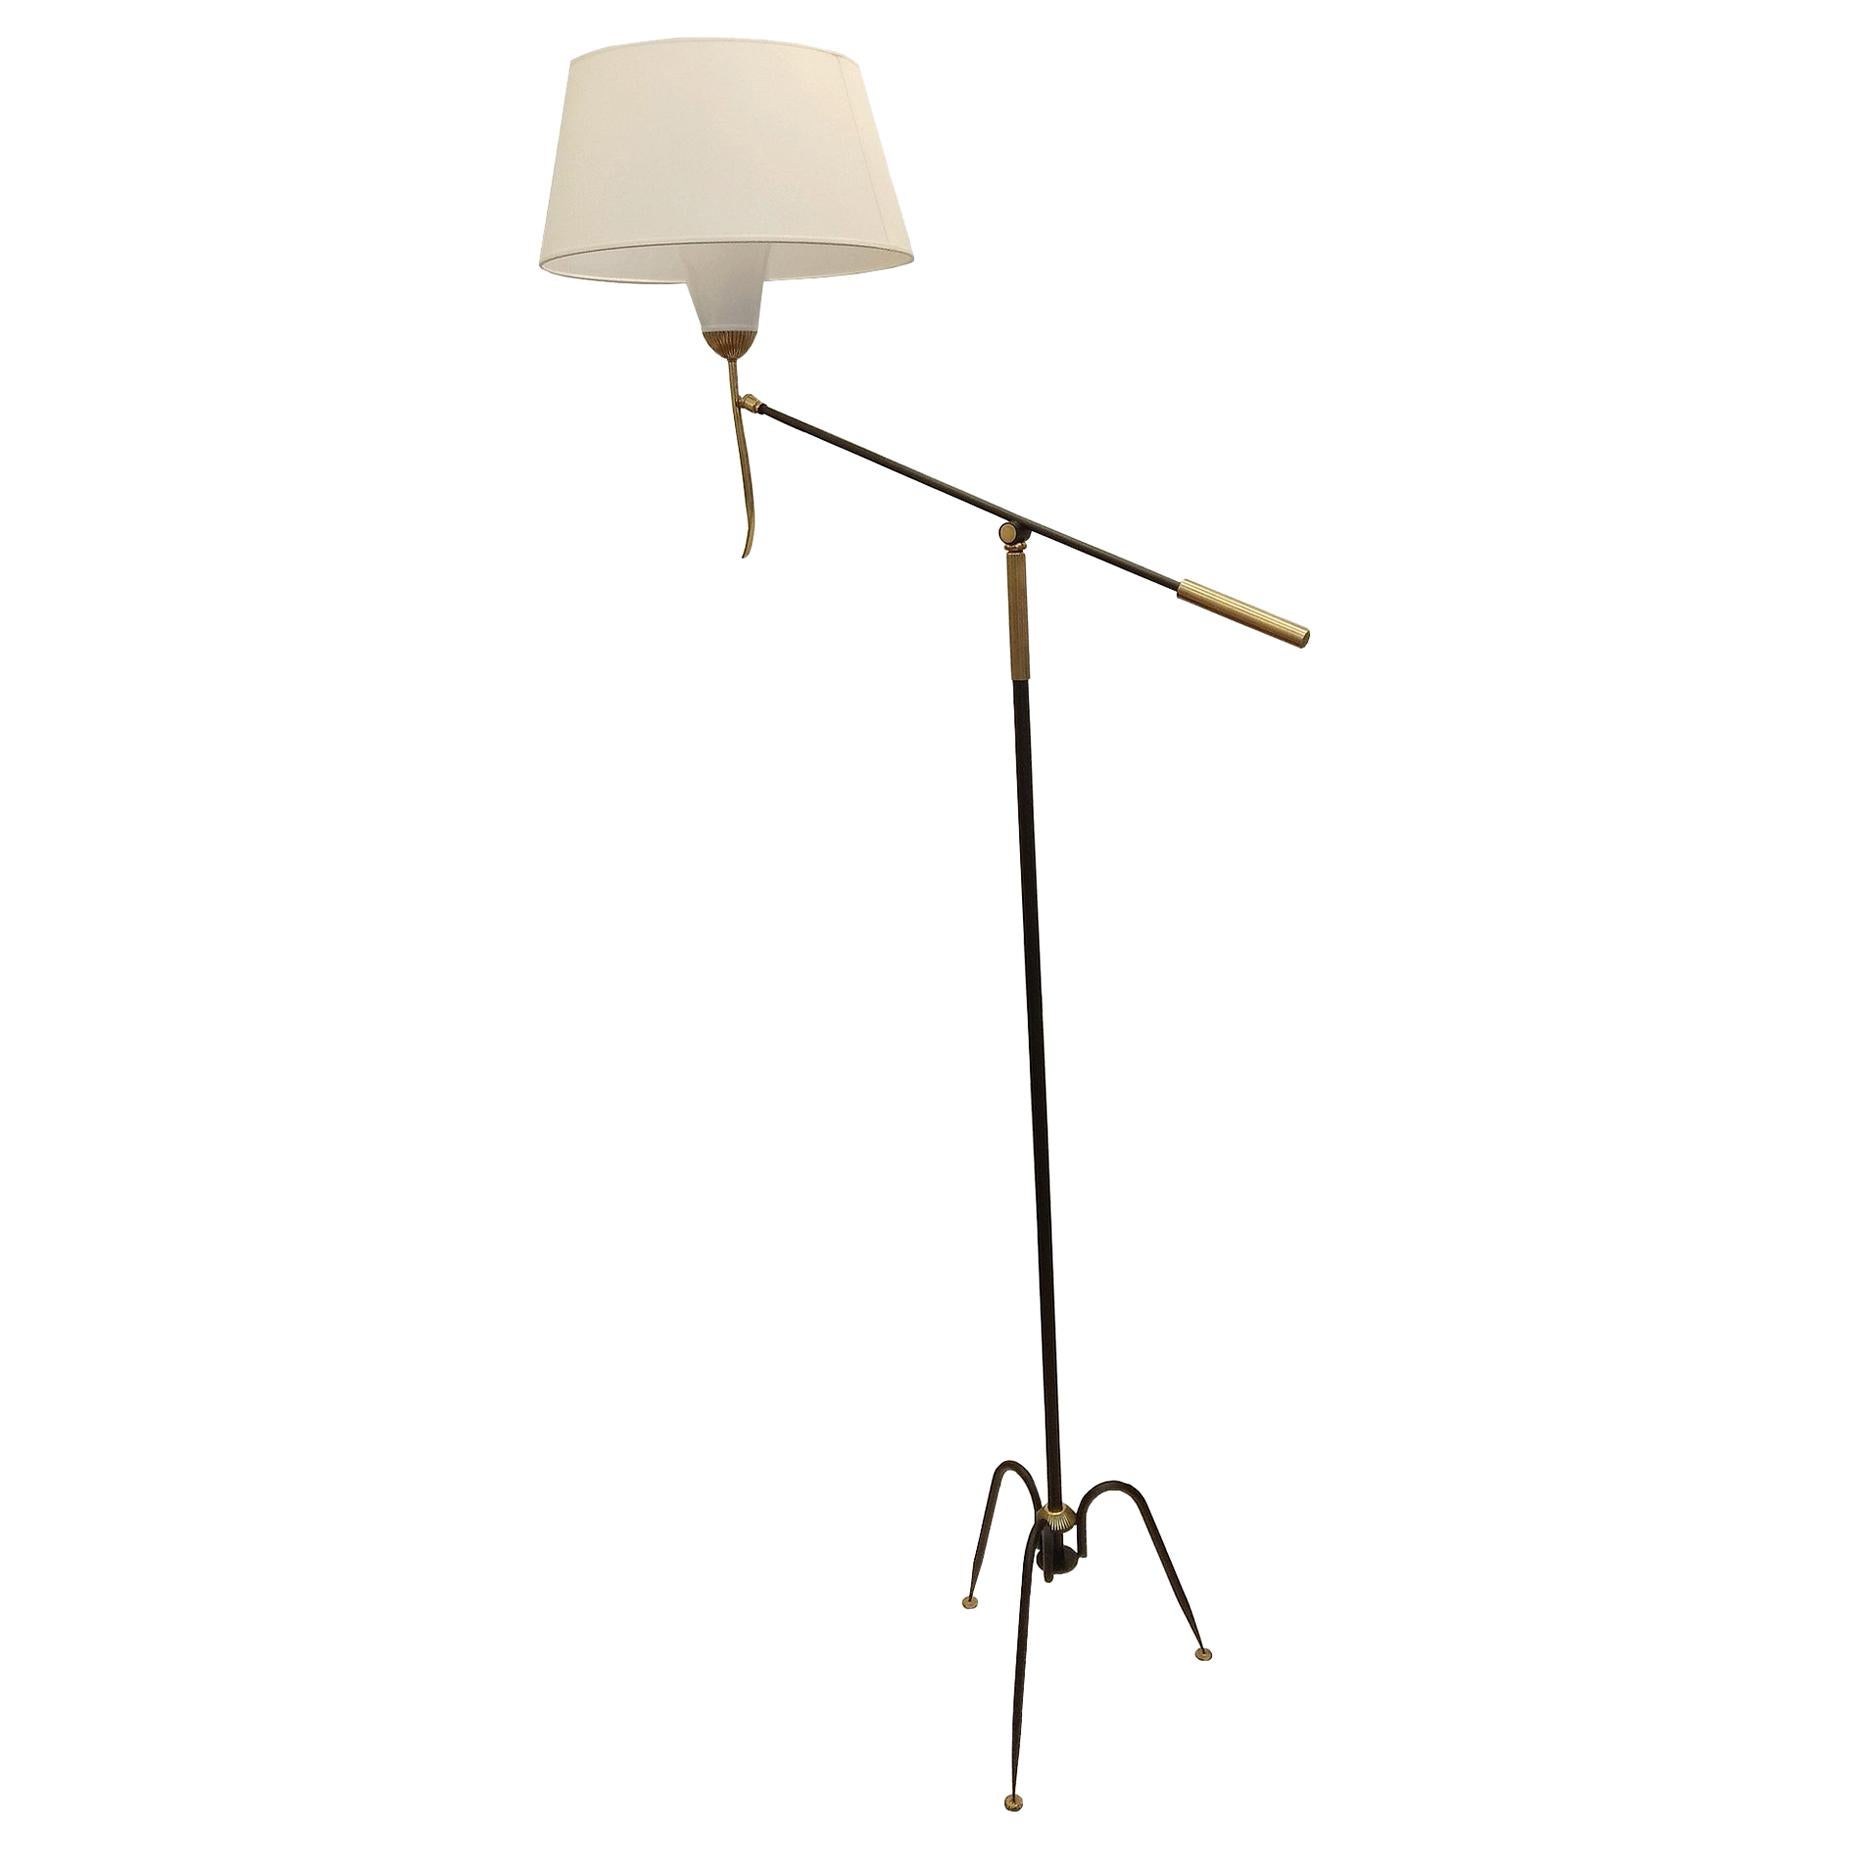 T 644 Floor Lamp by Maison Lunel, France, circa 1950